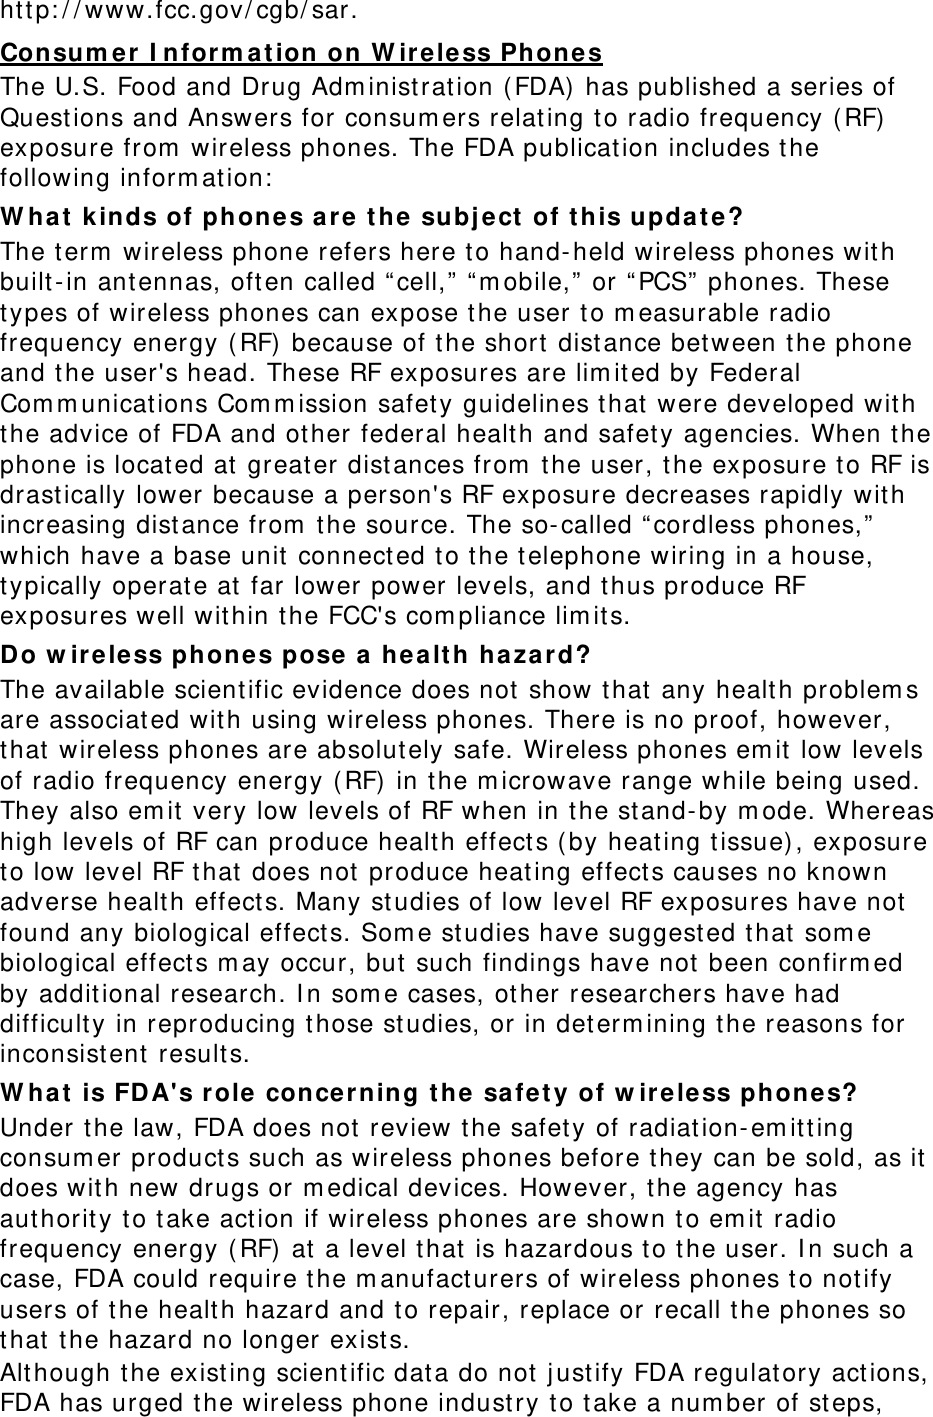 ht t p: / / www.fcc.gov/ cgb/ sar. Consu m er I nfor m at ion on W ir e le ss Phone s The U.S. Food and Drug Adm inist rat ion (FDA)  has published a series of Quest ions and Answers for consum ers relating t o radio frequency ( RF)  exposure from  wireless phones. The FDA publication includes t he following inform at ion:  W hat  k inds of phones a re t he subj ect  of t his updat e? The t erm  wireless phone refers here t o hand- held wireless phones wit h built- in antennas, oft en called “ cell,”  “ m obile,” or “ PCS”  phones. These types of wireless phones can expose the user to m easurable radio frequency energy ( RF) because of t he short dist ance bet ween t he phone and t he user&apos;s head. These RF exposures are lim it ed by Federal Com m unicat ions Com m ission safet y guidelines t hat  were developed wit h the advice of FDA and other federal healt h and safet y agencies. When t he phone is locat ed at  great er dist ances from  t he user, the exposure t o RF is drast ically lower because a person&apos;s RF exposure decreases rapidly wit h increasing distance from  t he source. The so- called “ cordless phones,” which have a base unit  connect ed t o the t elephone wiring in a house, typically operate at  far lower power levels, and t hus produce RF exposures well wit hin the FCC&apos;s com pliance lim it s. Do w ir e less phones pose a healt h ha za r d? The available scient ific evidence does not  show t hat  any healt h problem s are associated wit h using wireless phones. There is no proof, however, that  wireless phones are absolutely safe. Wireless phones em it  low levels of radio frequency energy ( RF)  in t he m icrowave range while being used. They also em it  very low levels of RF when in t he st and- by m ode. Whereas high levels of RF can produce healt h effect s (by heat ing t issue) , exposure to low level RF t hat does not produce heat ing effect s causes no known adverse healt h effect s. Many st udies of low level RF exposures have not  found any biological effect s. Som e st udies have suggest ed t hat  som e biological effect s m ay occur, but  such findings have not  been confirm ed by addit ional research. I n som e cases, other researchers have had difficult y in reproducing t hose st udies, or in det erm ining t he reasons for inconsist ent result s. W hat  is FD A&apos;s role  conce r n ing t he  safet y of w ire less phones? Under t he law, FDA does not review t he safet y of radiat ion- em it ting consum er product s such as wireless phones before t hey can be sold, as it does with new drugs or m edical devices. However, the agency has aut horit y t o t ake act ion if wireless phones are shown to em it  radio frequency energy ( RF) at  a level t hat  is hazardous to t he user. I n such a case, FDA could require t he m anufacturers of wireless phones t o not ify users of t he health hazard and t o repair, replace or recall t he phones so that  t he hazard no longer exists. Although the existing scientific dat a do not  j ustify FDA regulat ory act ions, FDA has urged t he wireless phone indust ry t o t ake a num ber of steps, 